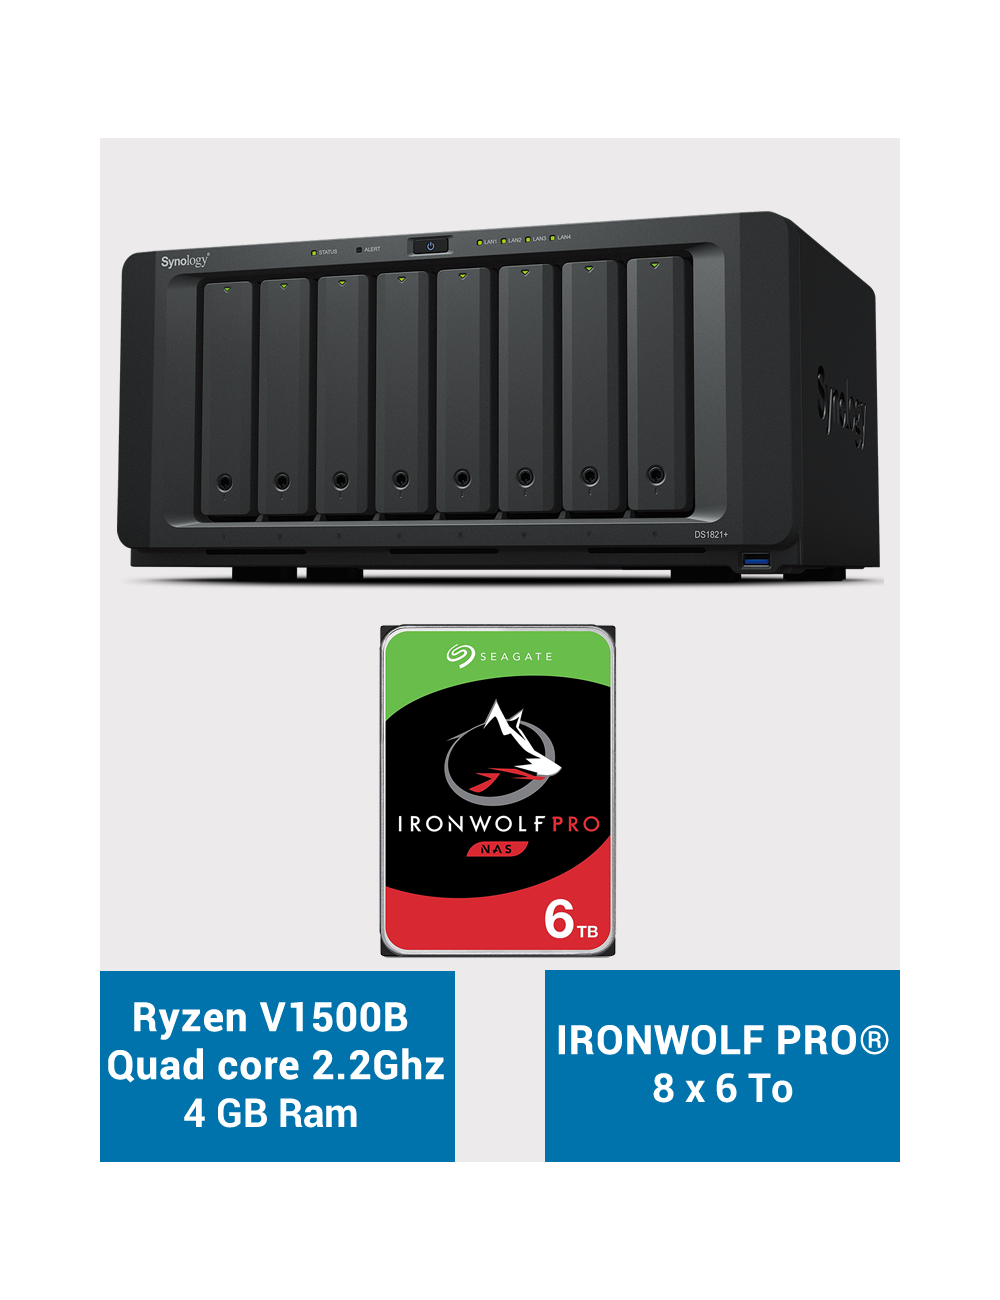 QNAP TS-231K Serveur NAS IRONWOLF 16To (2x8To)